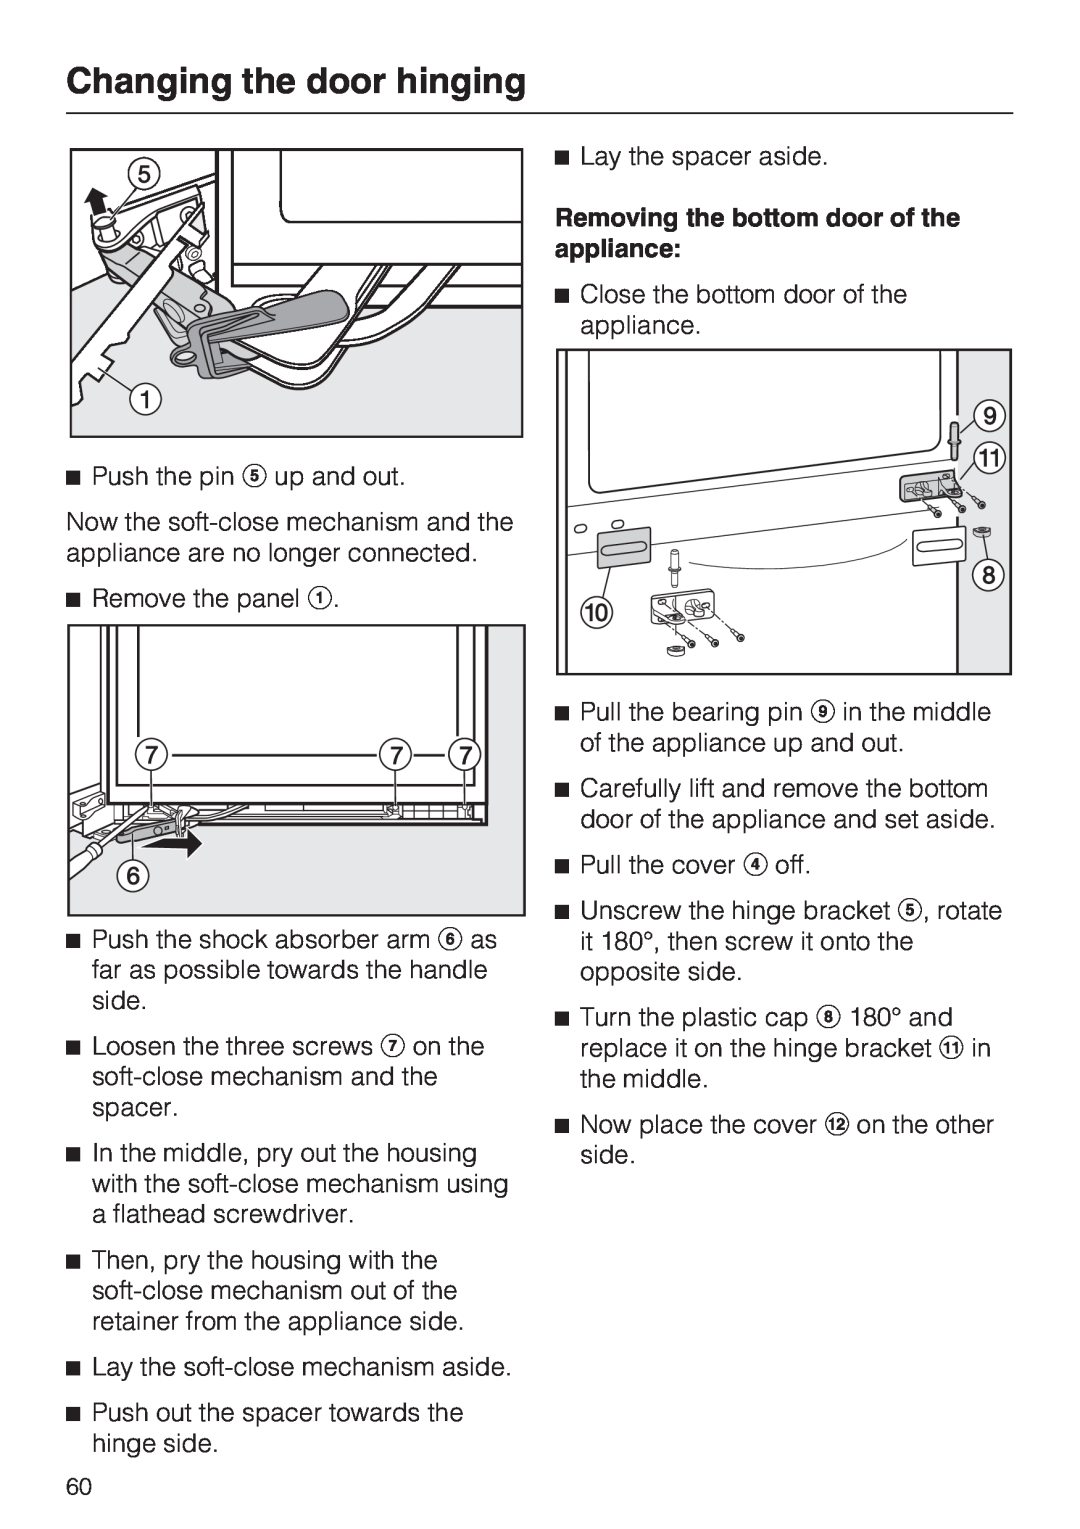 Miele KFN 14943 SDE ED installation instructions Removing the bottom door of the appliance, Changing the door hinging 